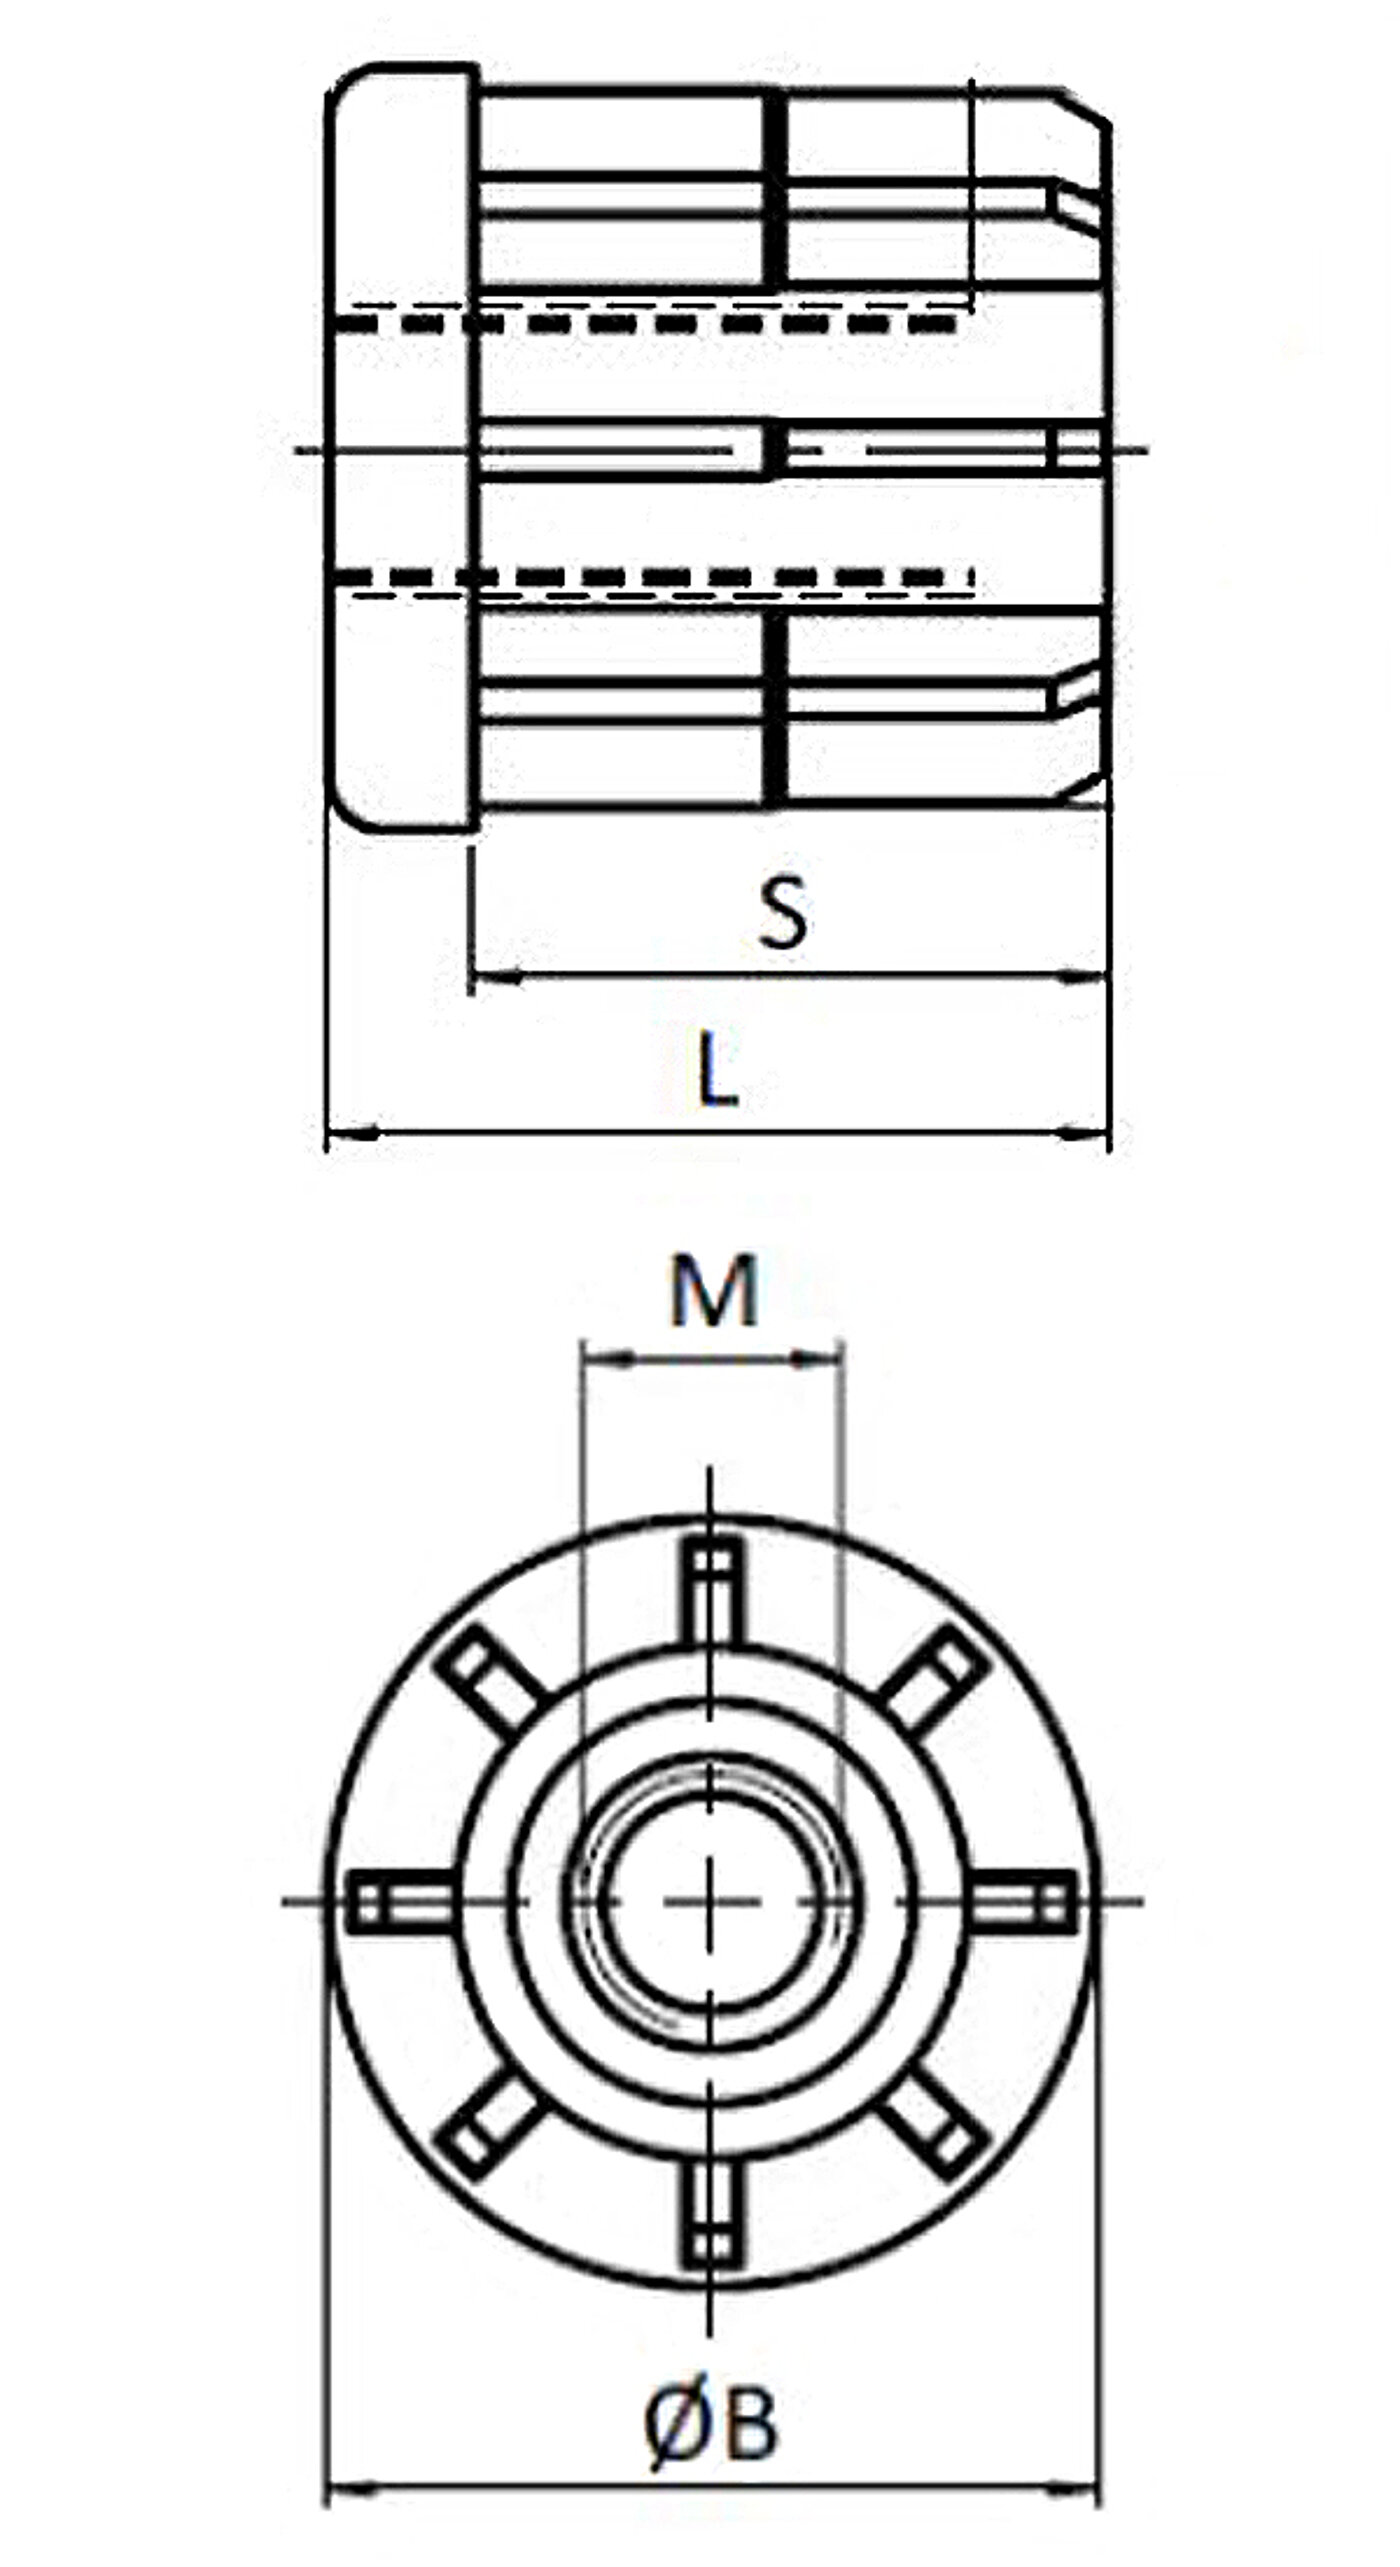 schematic drawing of a cylindrical threaded tube insert made of polyamide, with a centered inner thread, for press-fitting into round tube ends, isolated on white background